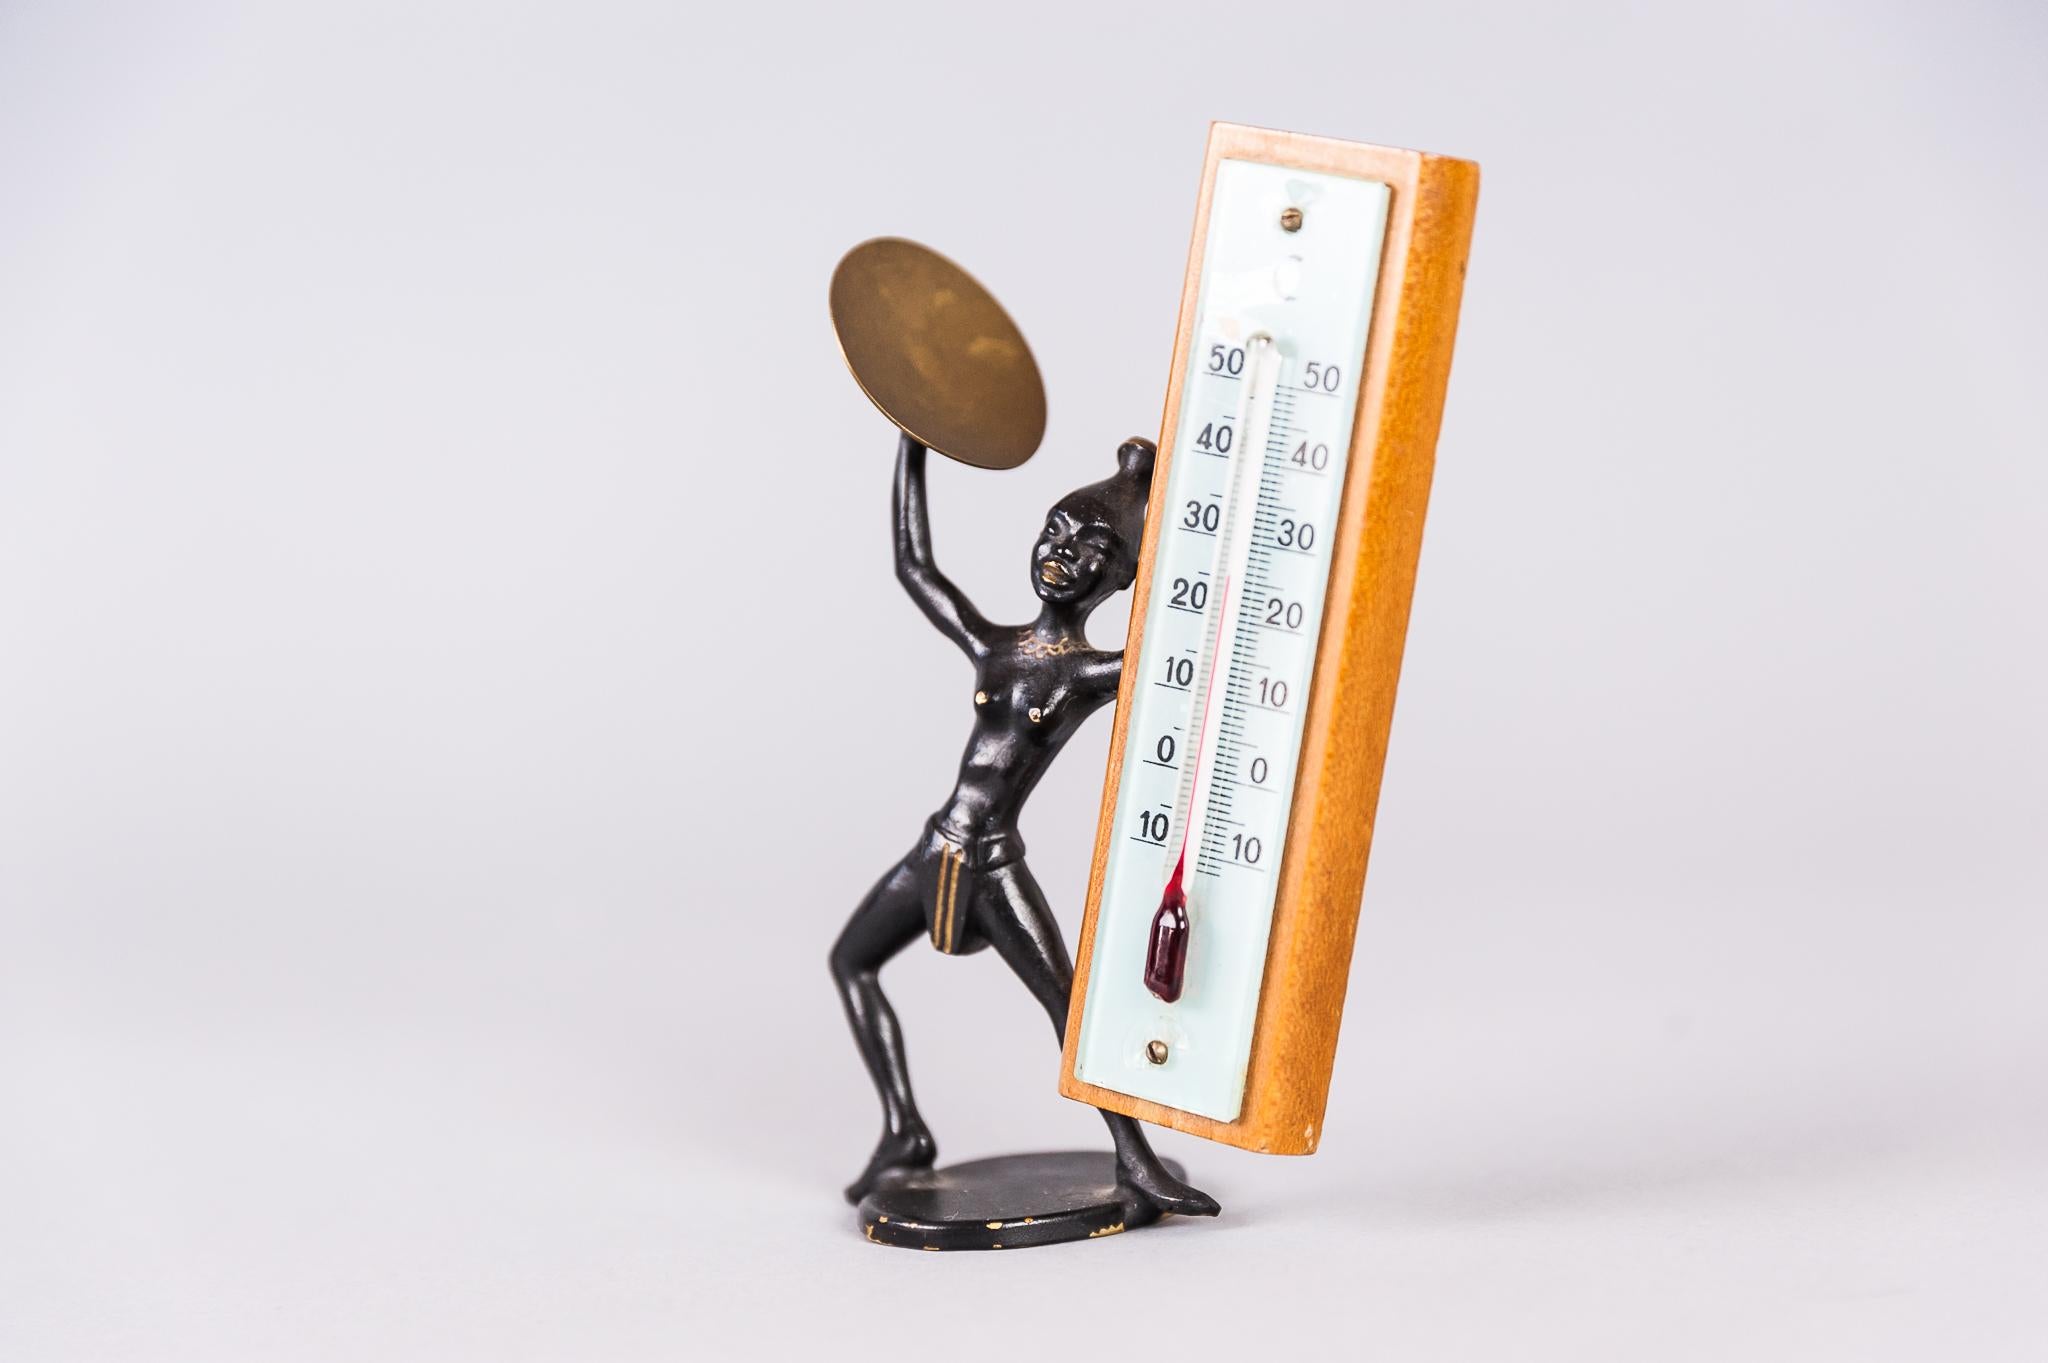 Thermometer in the style of Hagenauer, 1950s.
Original condition.